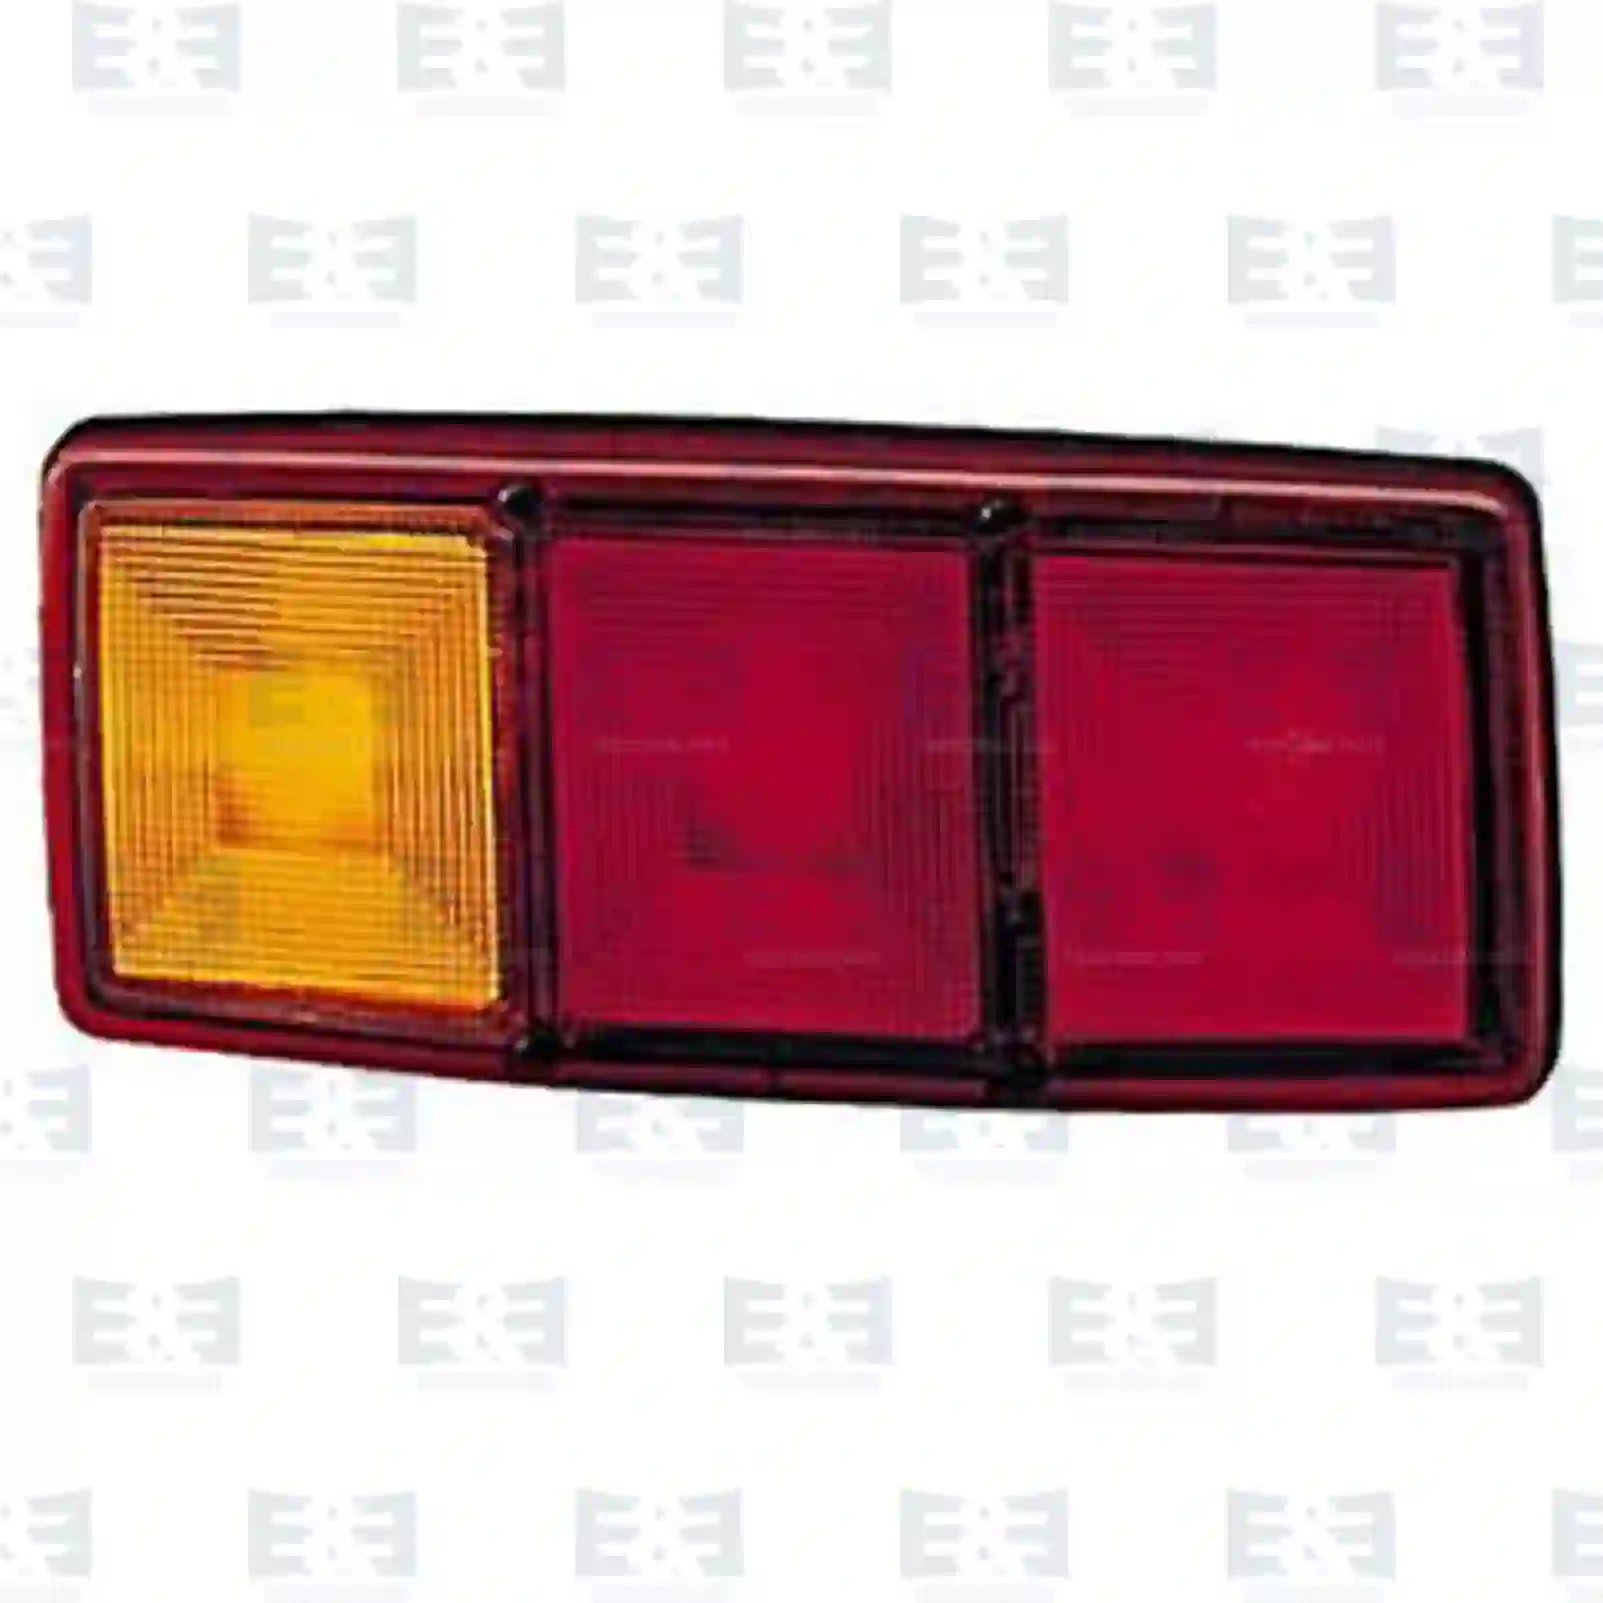 Tail lamp, right, without bulbs, 2E2299207, 0882012, 882012, LSX0117888, 41628726, 42013058, 77959, 77960, 0005405470, 0015446803, 0015448103, 0025440403, 000150323, 000150328, 20223974, 060552, 060553, 060565, 060566 ||  2E2299207 E&E Truck Spare Parts | Truck Spare Parts, Auotomotive Spare Parts Tail lamp, right, without bulbs, 2E2299207, 0882012, 882012, LSX0117888, 41628726, 42013058, 77959, 77960, 0005405470, 0015446803, 0015448103, 0025440403, 000150323, 000150328, 20223974, 060552, 060553, 060565, 060566 ||  2E2299207 E&E Truck Spare Parts | Truck Spare Parts, Auotomotive Spare Parts